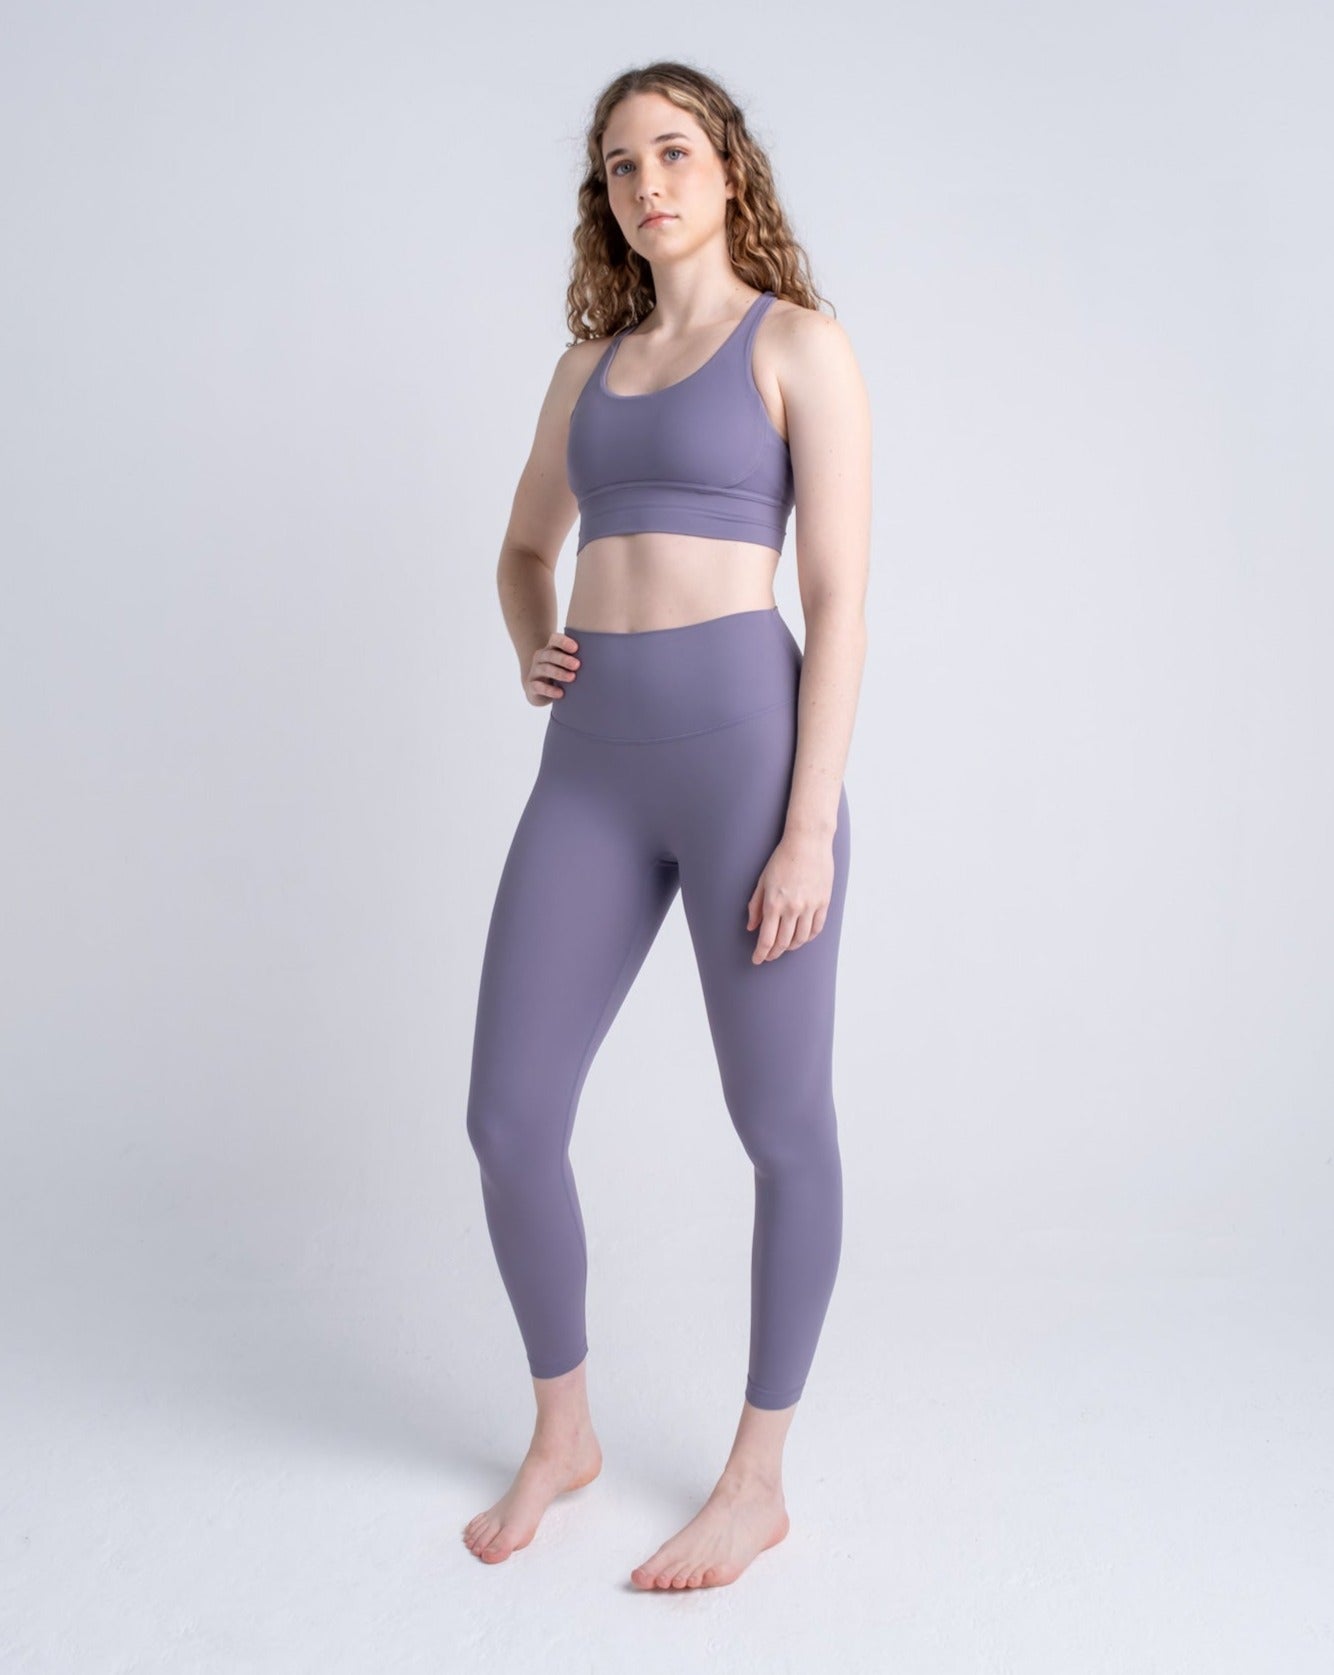 HIGH-RISE LEGGING WITH POCKETS - ONYX